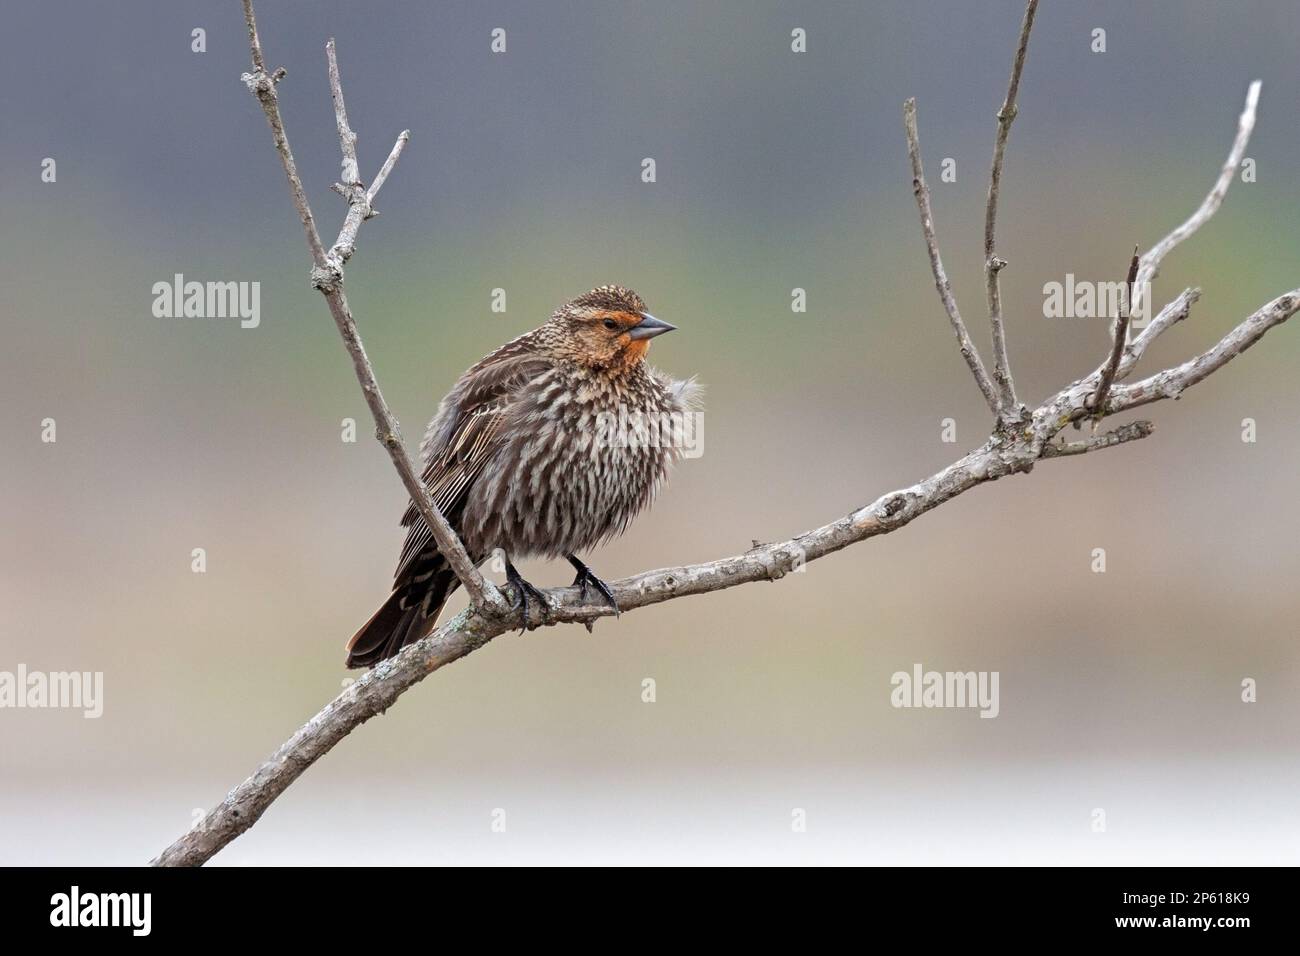 With a red colored face and windblown feathers, a female red-wing blackbird perched on a branch. Soft colors of springtime in the background. Stock Photo